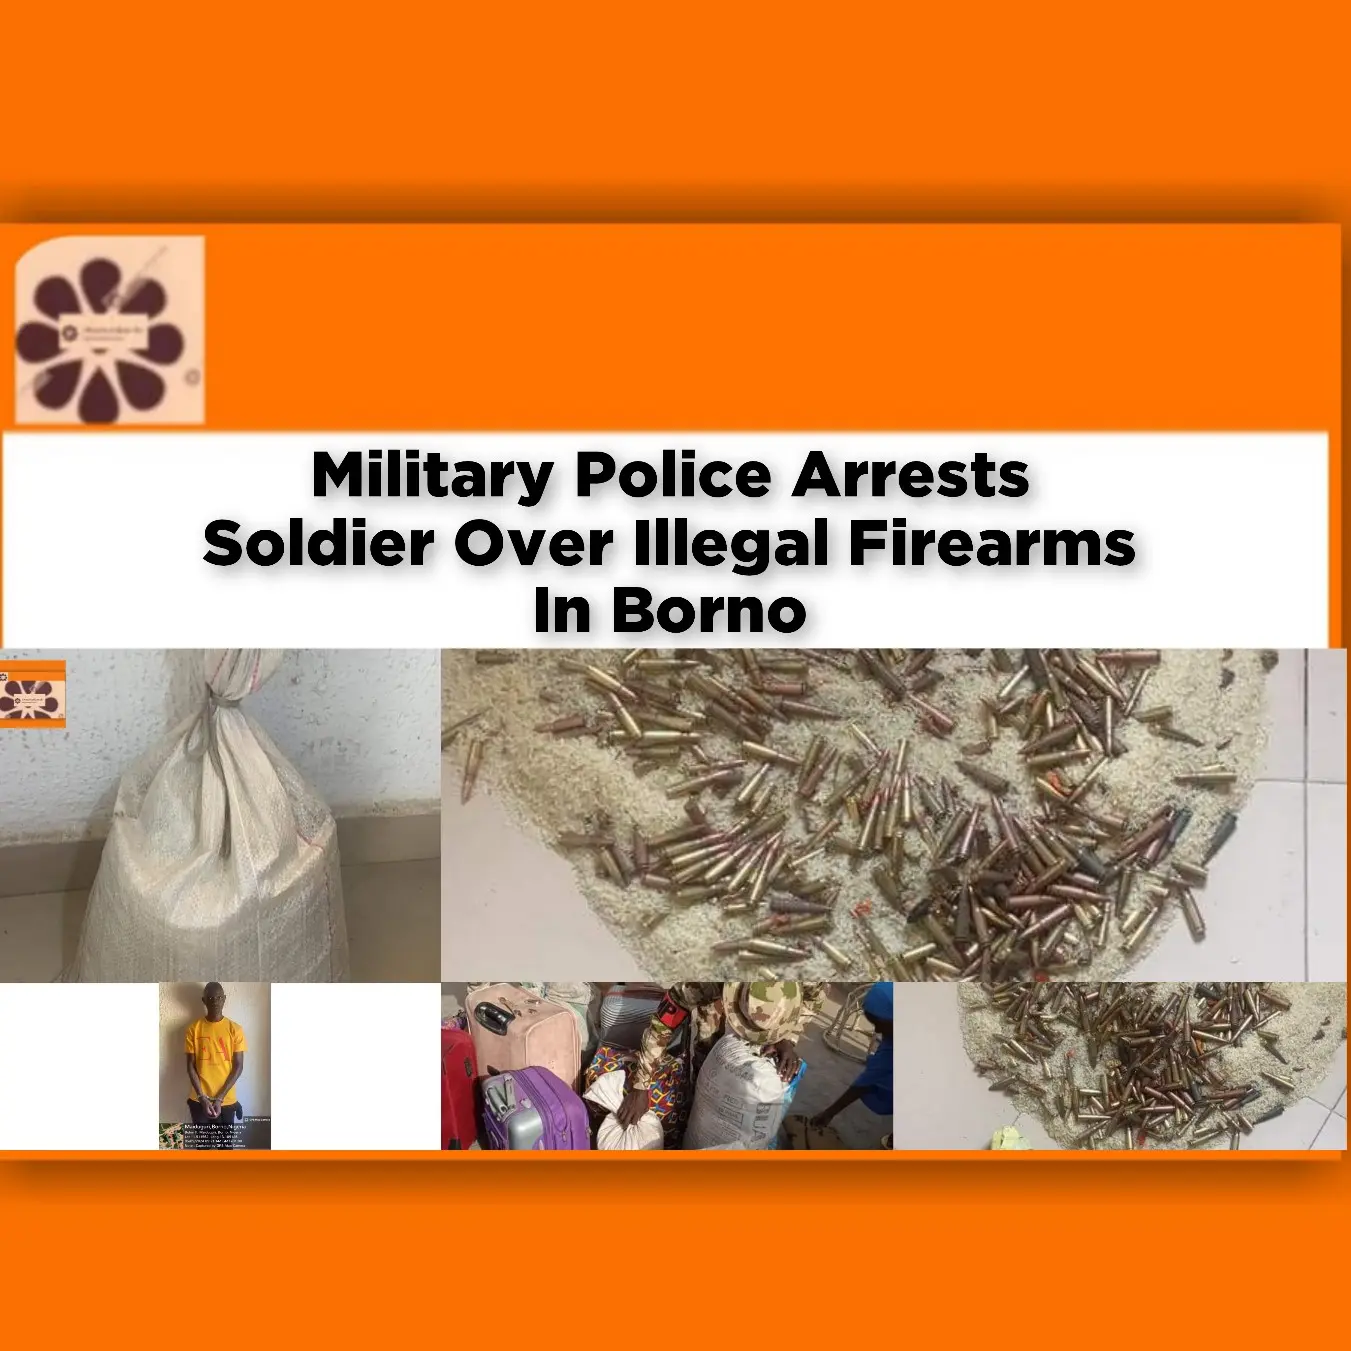 Military Police Arrests Soldier Over Illegal Firearms In Borno ~ OsazuwaAkonedo #Northeast